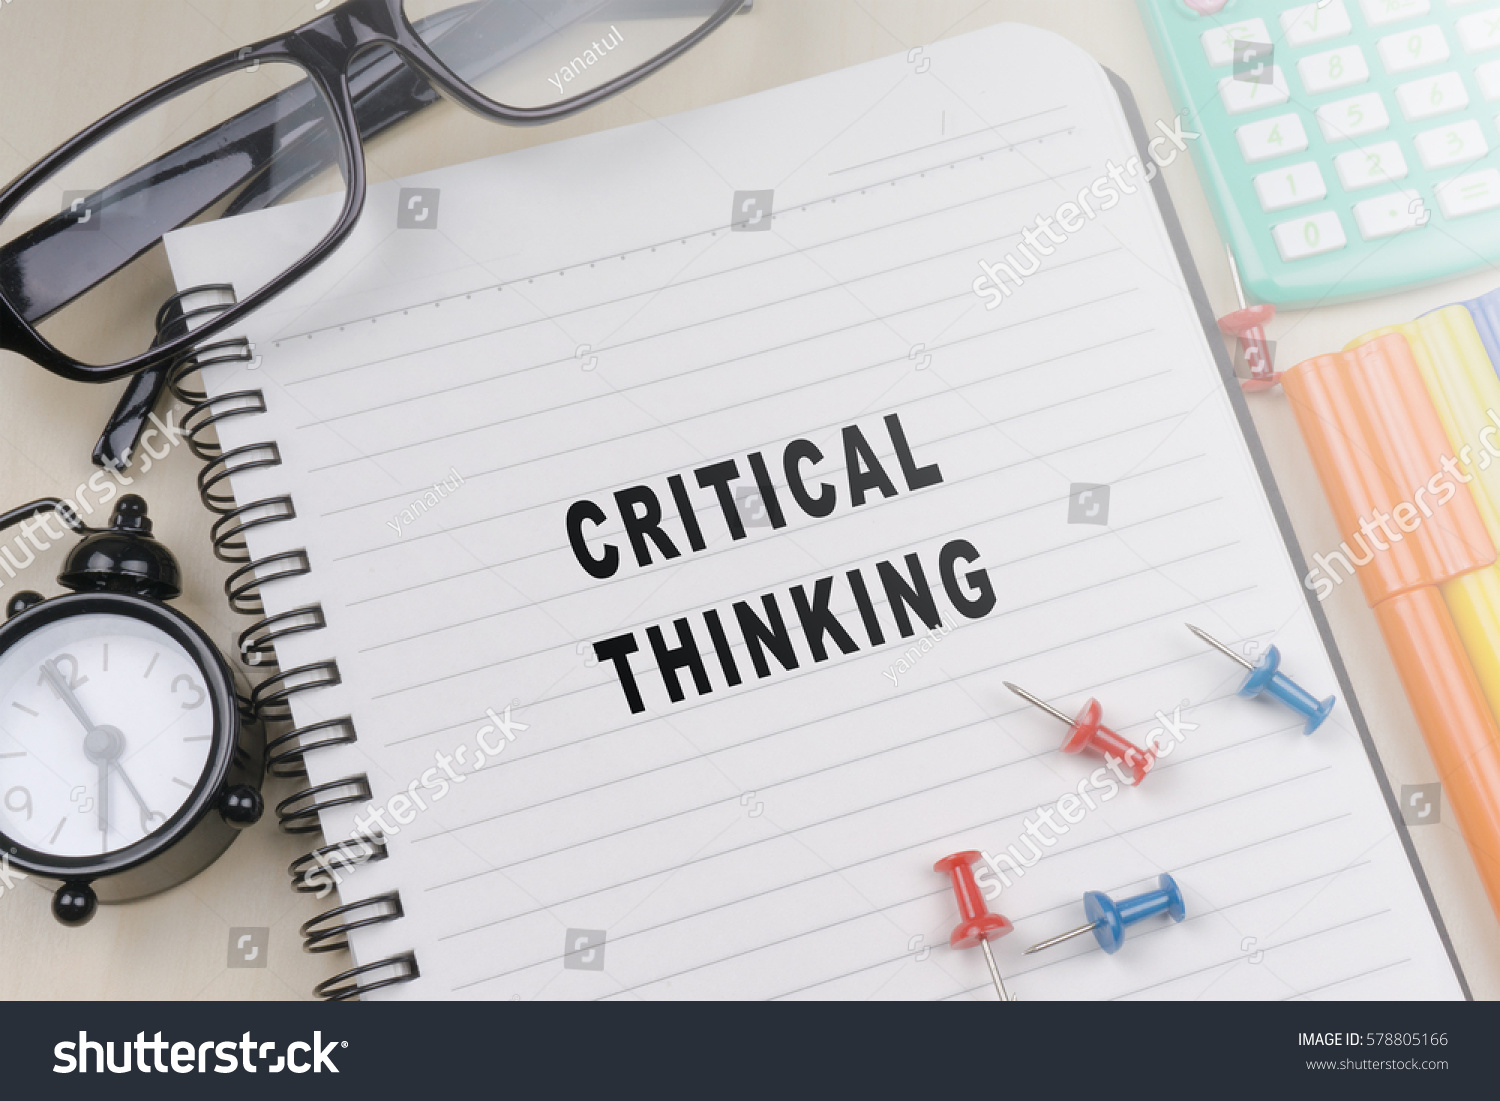 Defining Critical Thinking